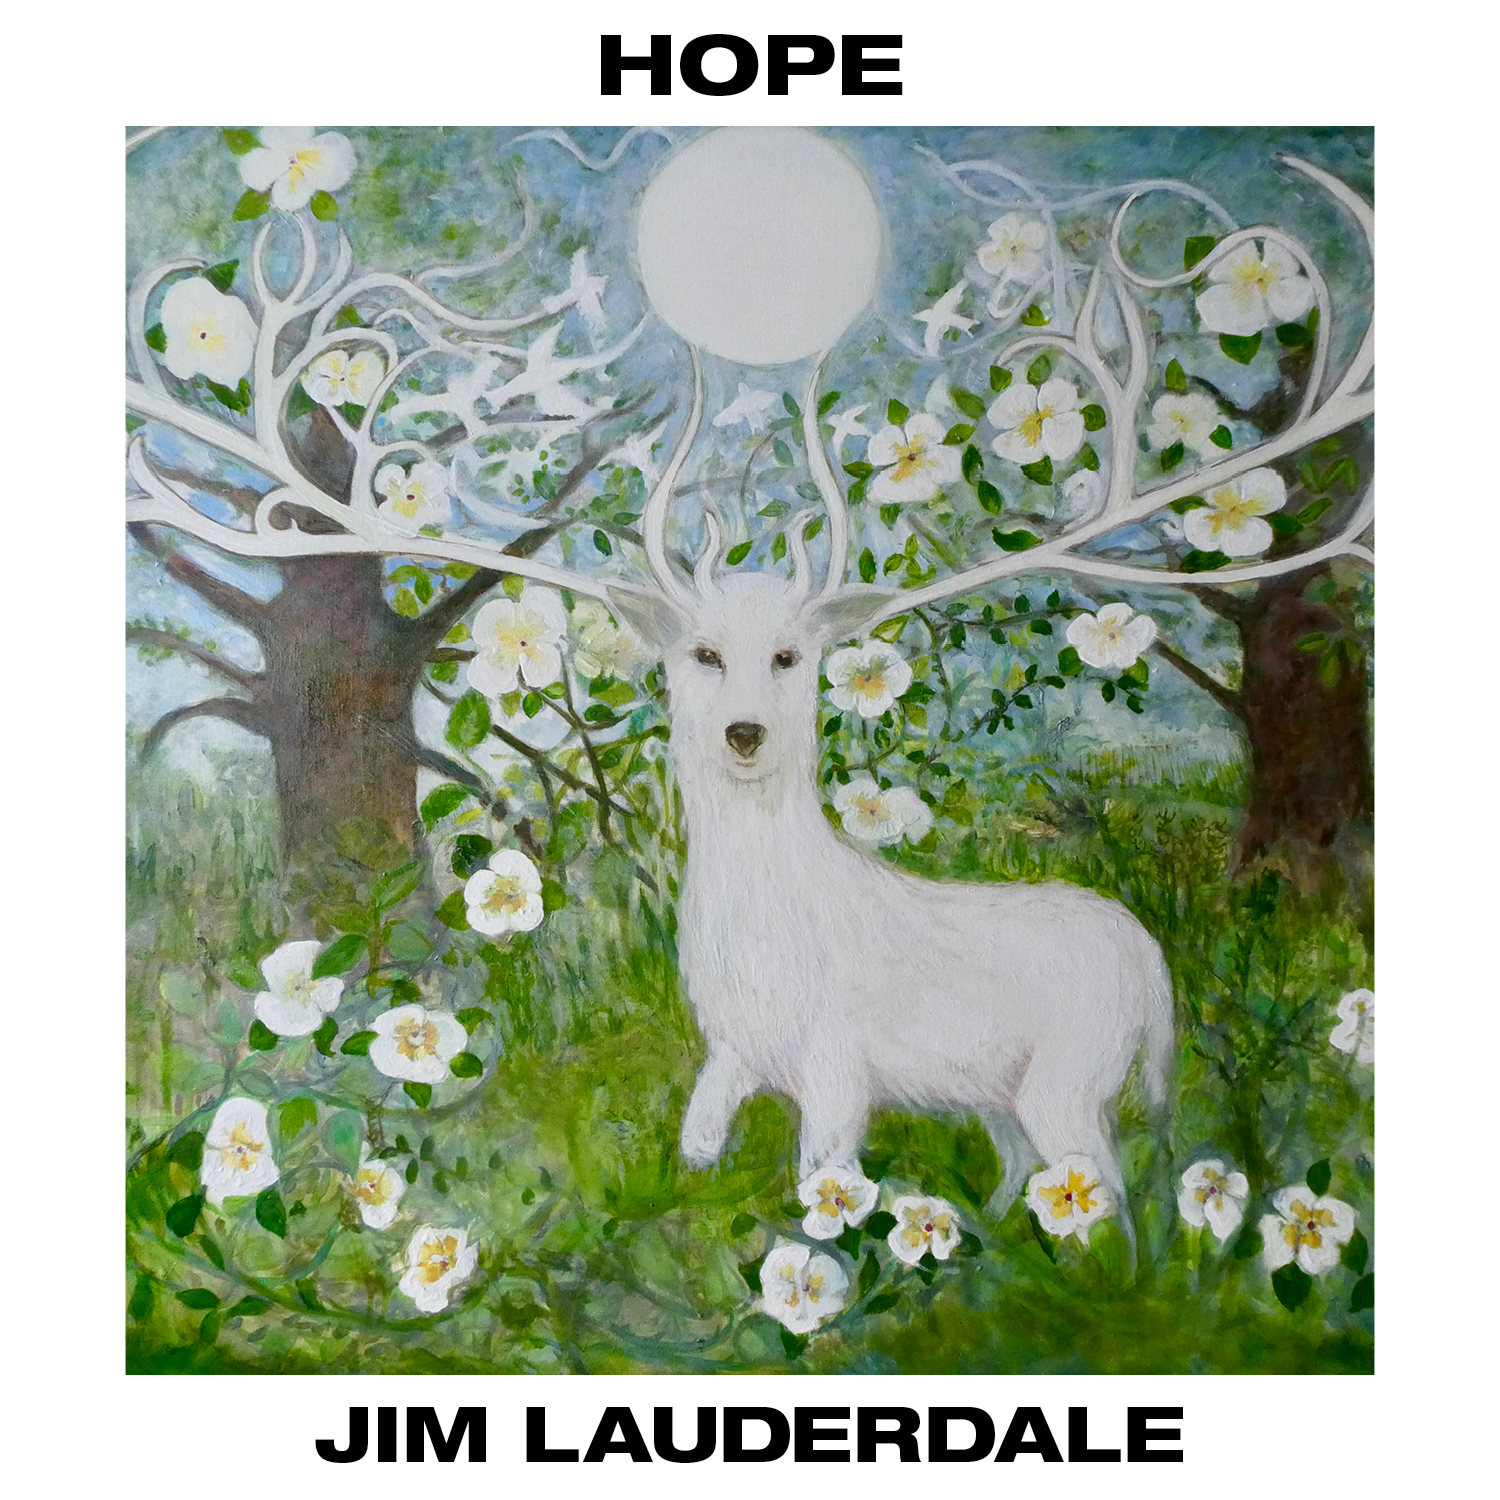 Jim Lauderdale Shares Second Single “Memory"; Robert Hunter Co-Write on 'Hope' Out July 30